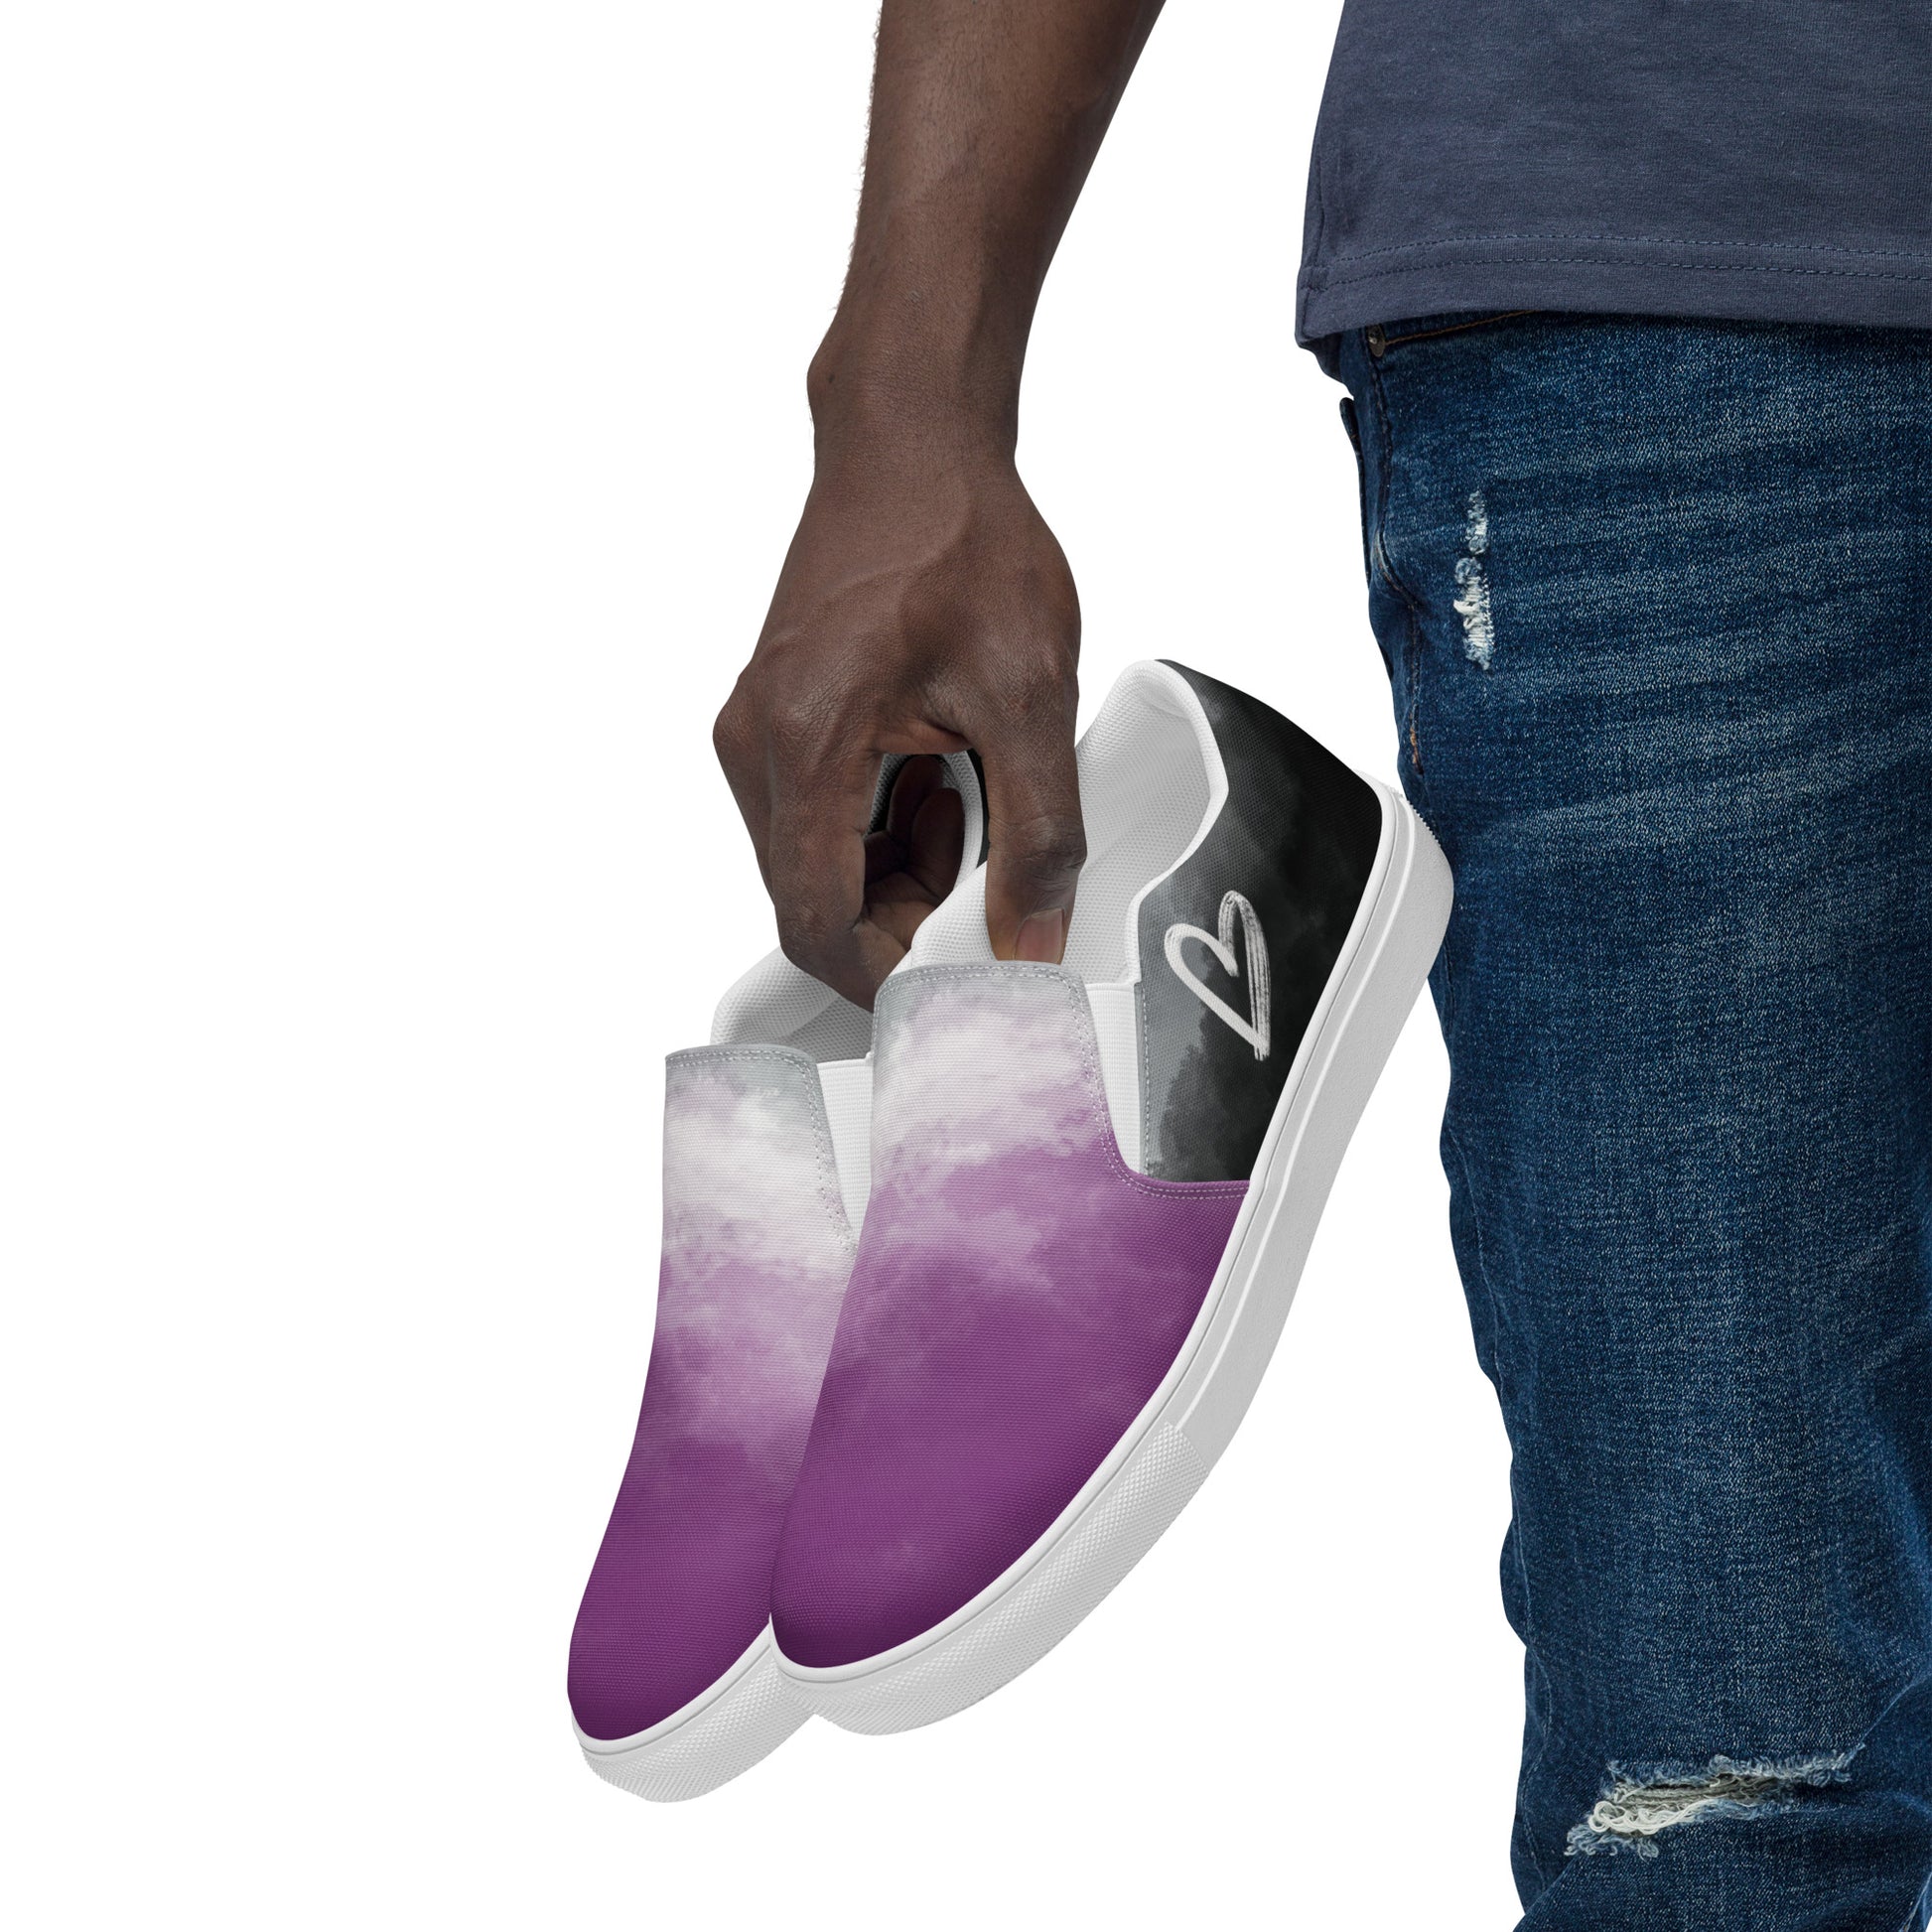 A model holds a pair of slip-on shoes with clouds in the asexual flag colors, a hand drawn white heart on the side, and the Aras Sivad Studio logo on the back.